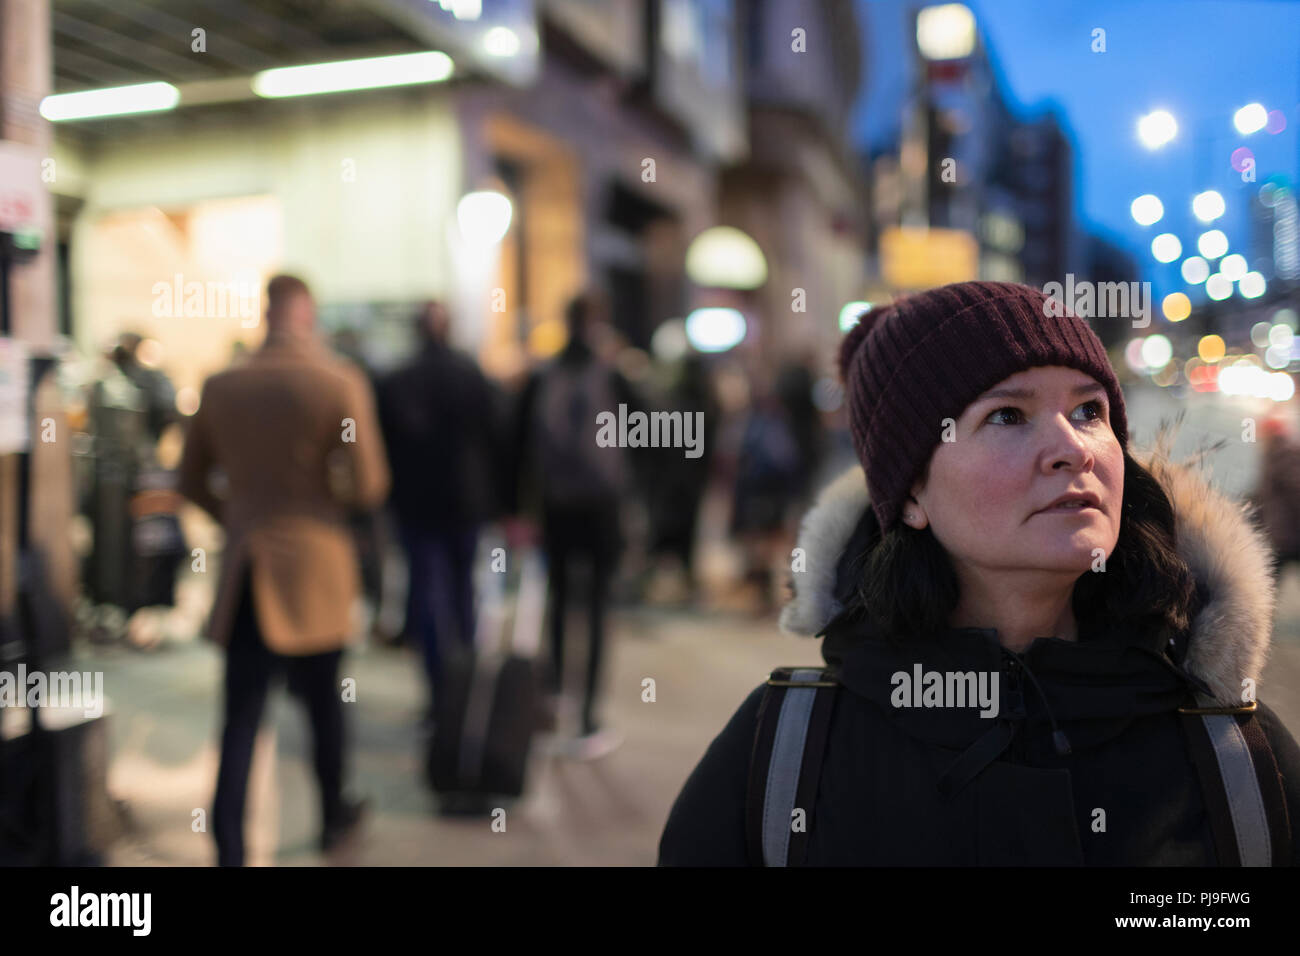 Woman in warm clothing standing on urban sidewalk at night Stock Photo